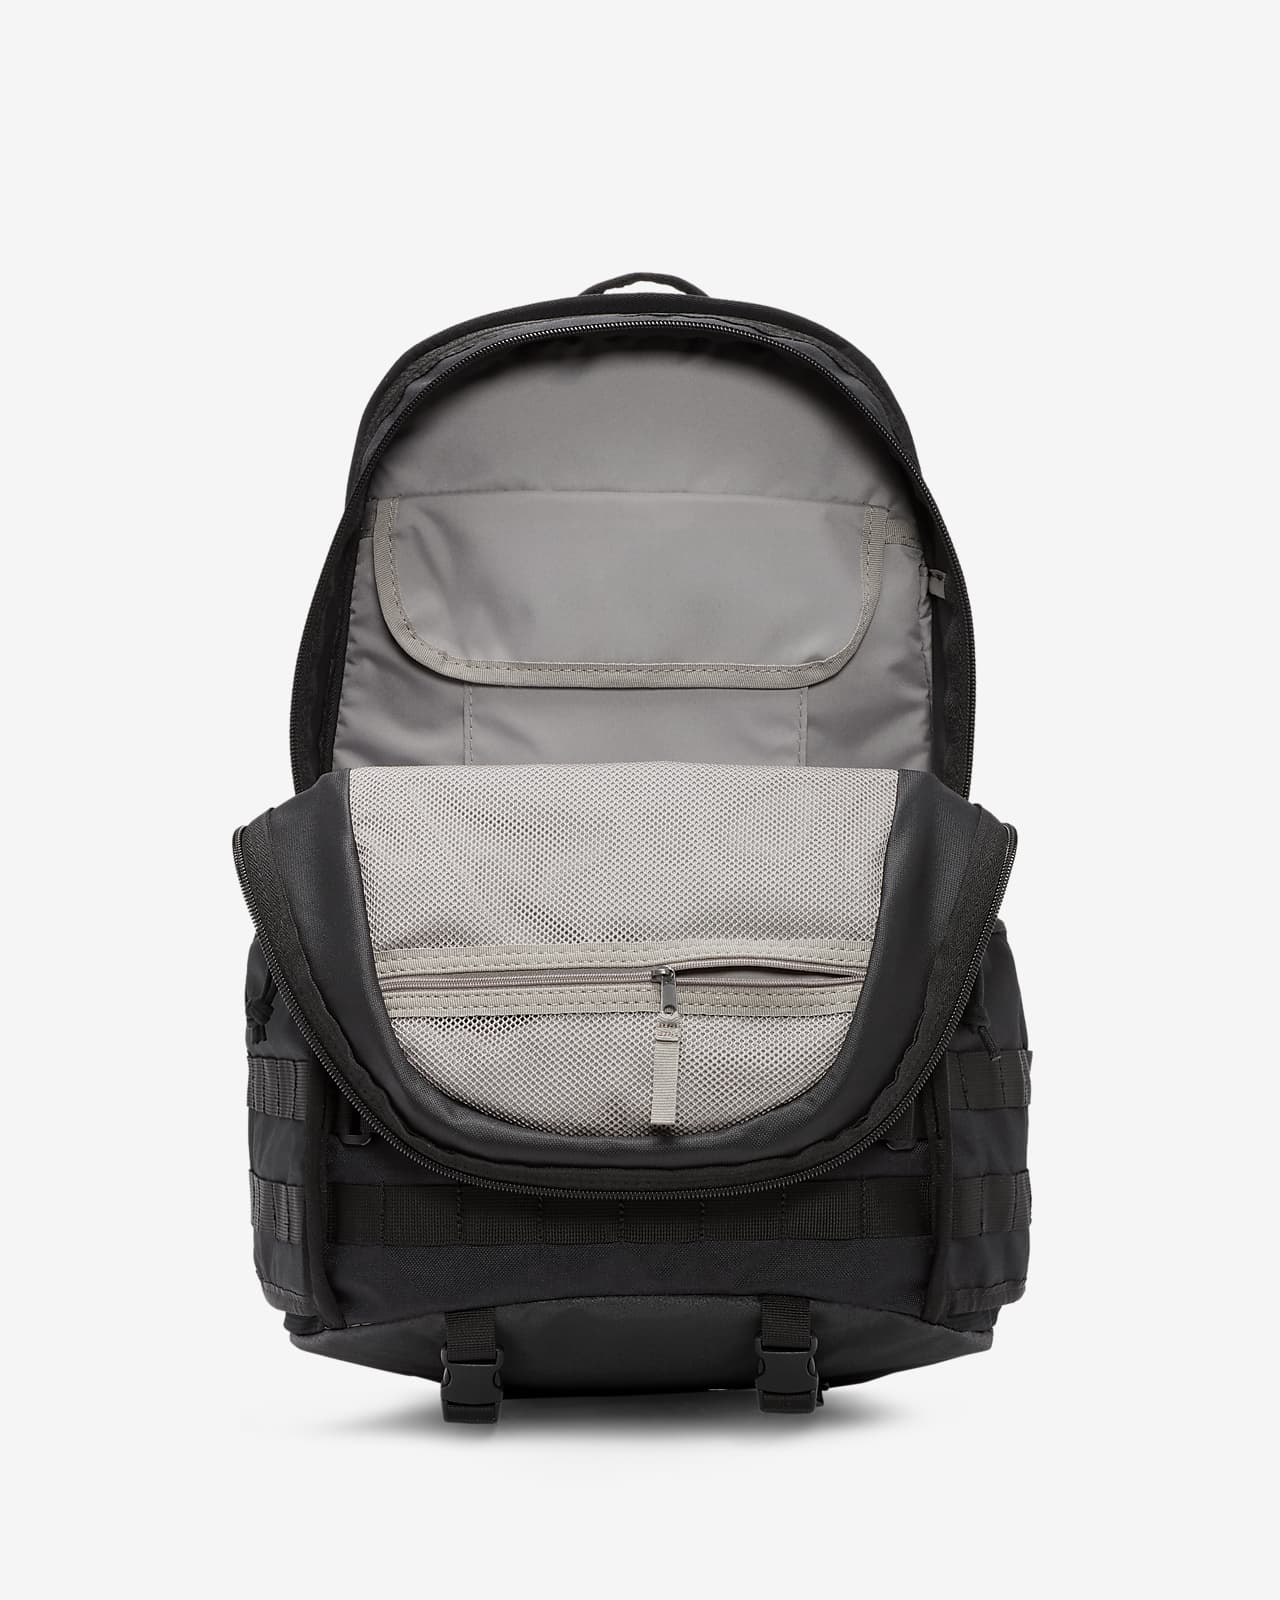 NIKE RPM Back pack ナイキバックパック　ブラック